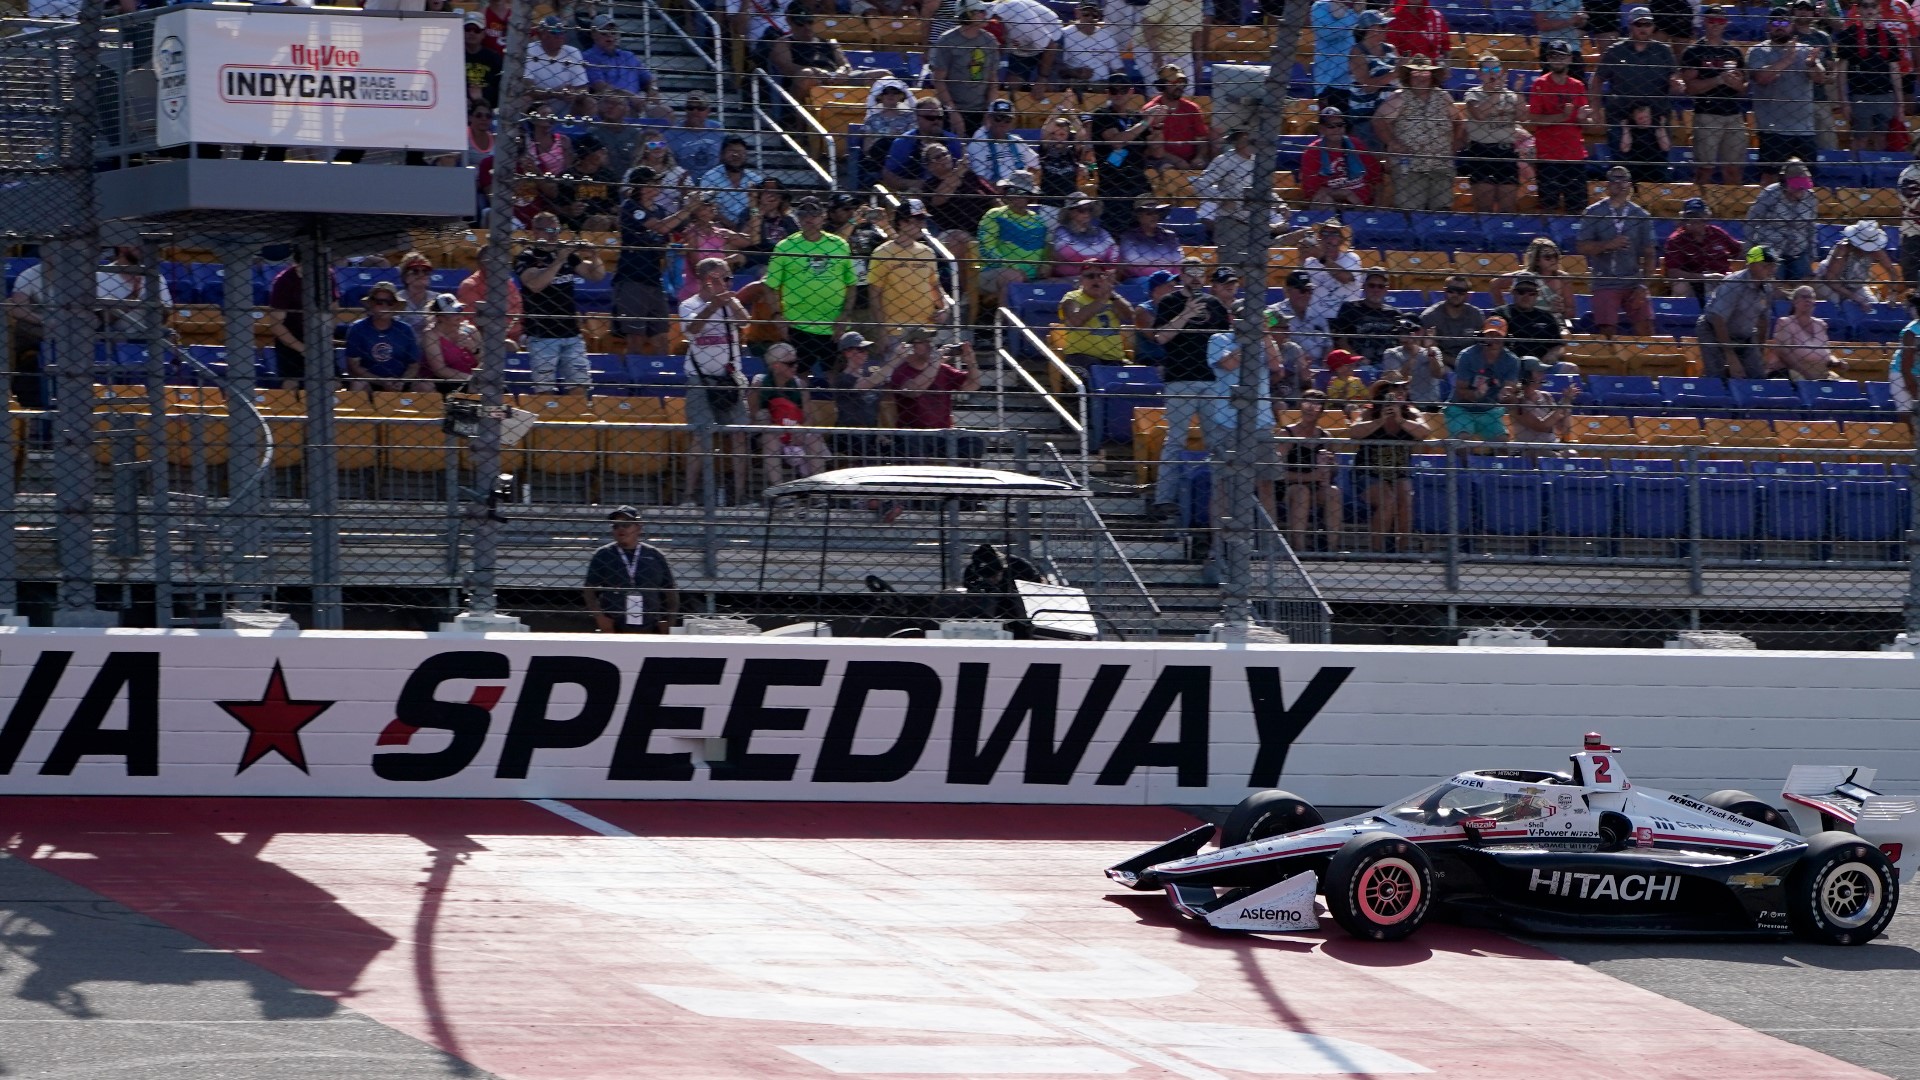 Fans of INDYCAR at the Iowa Speedway were in for a shock recently: ticket prices went up drastically.